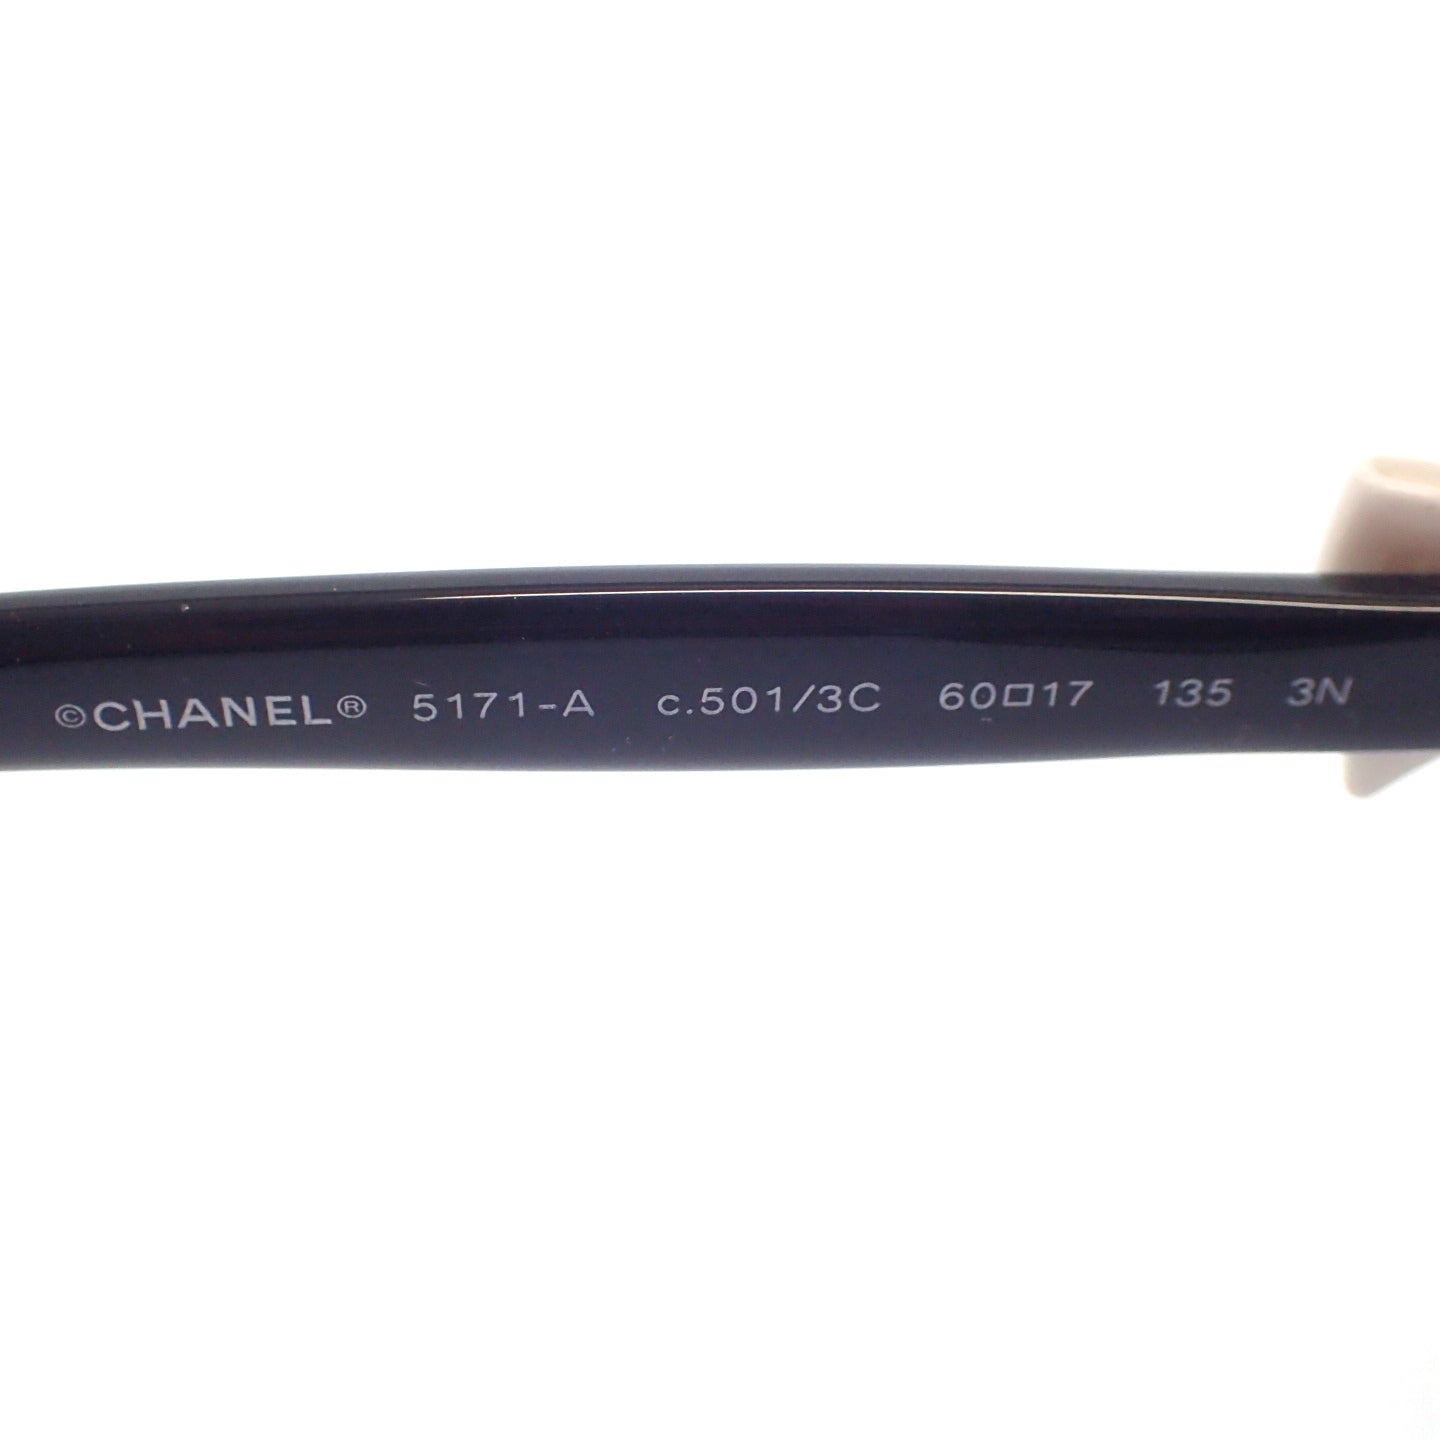 CHANEL sunglasses here mark ribbon 5171-A 60□17-135 black with box CHANEL [AFI18] [Used] 